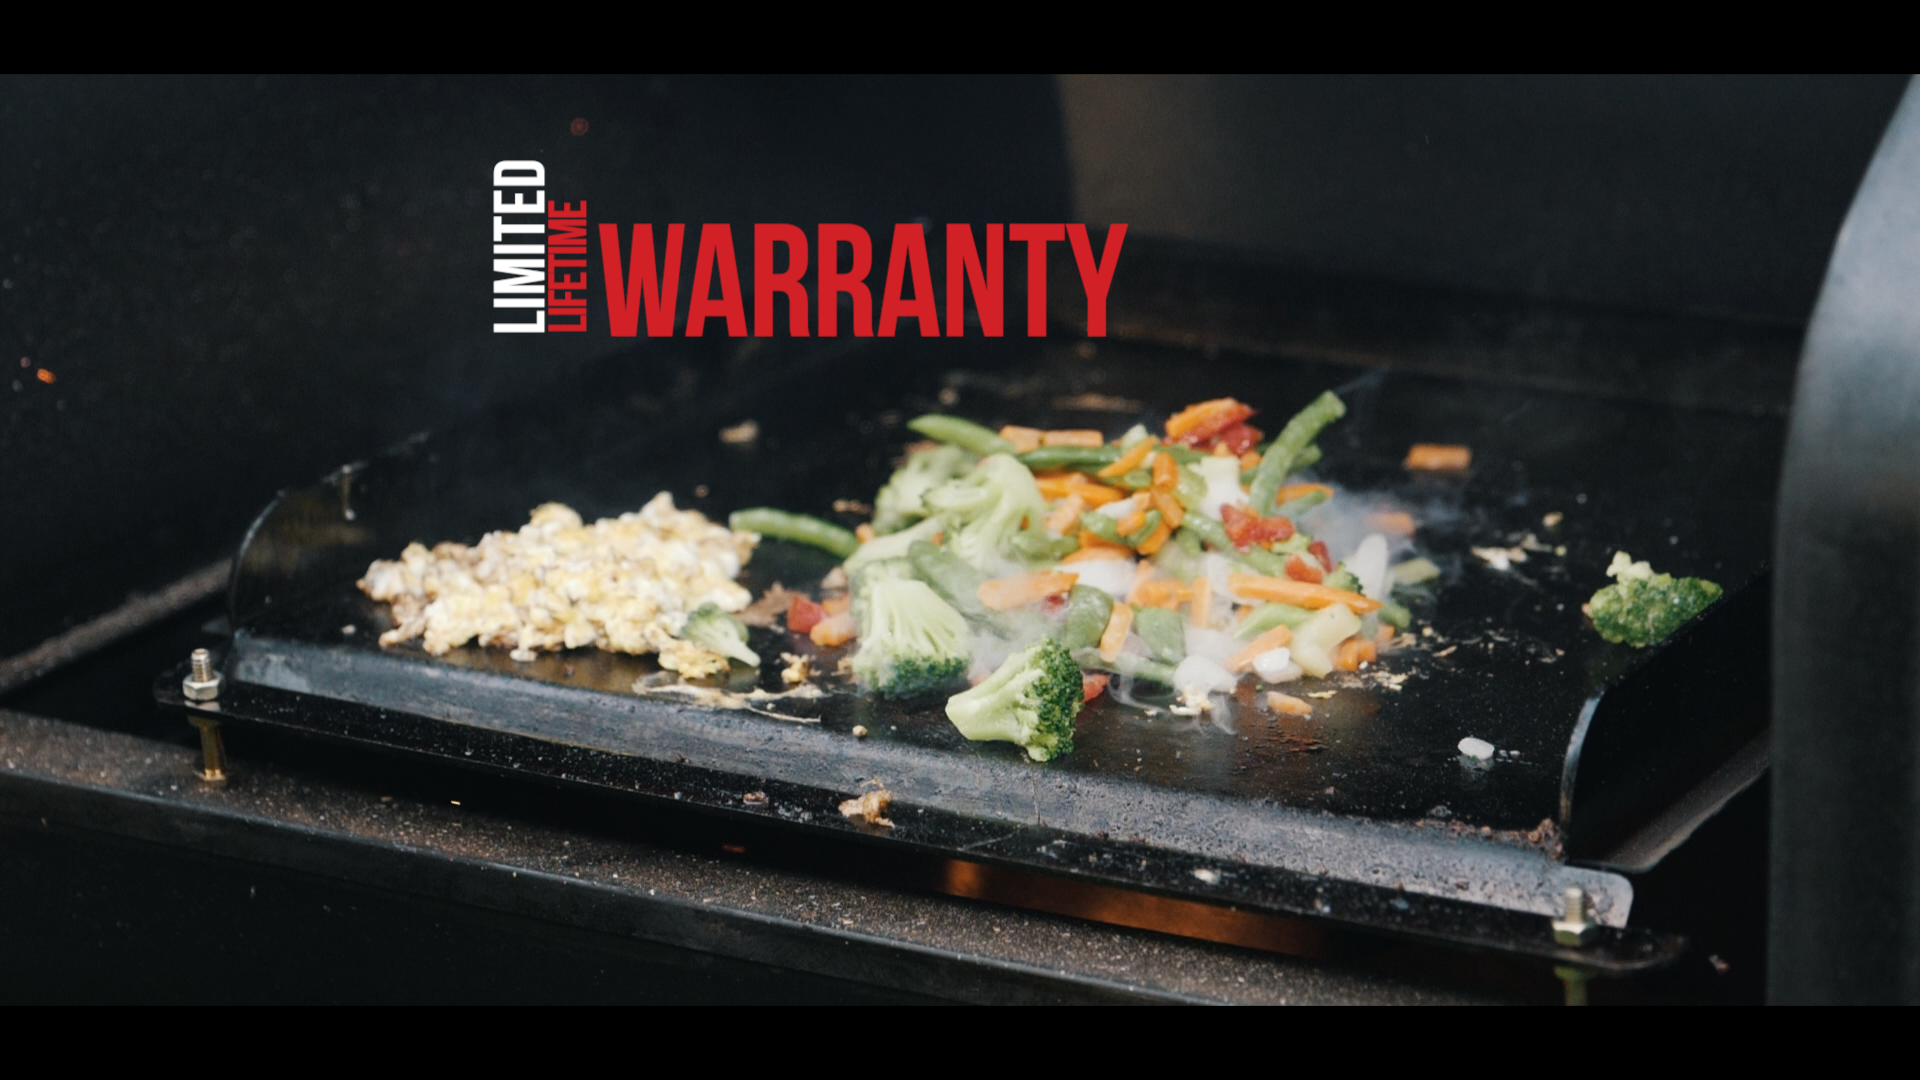 Griddle Hack pellet grill griddle insert by BBQ Hack with a Limited Lifetime Warranty